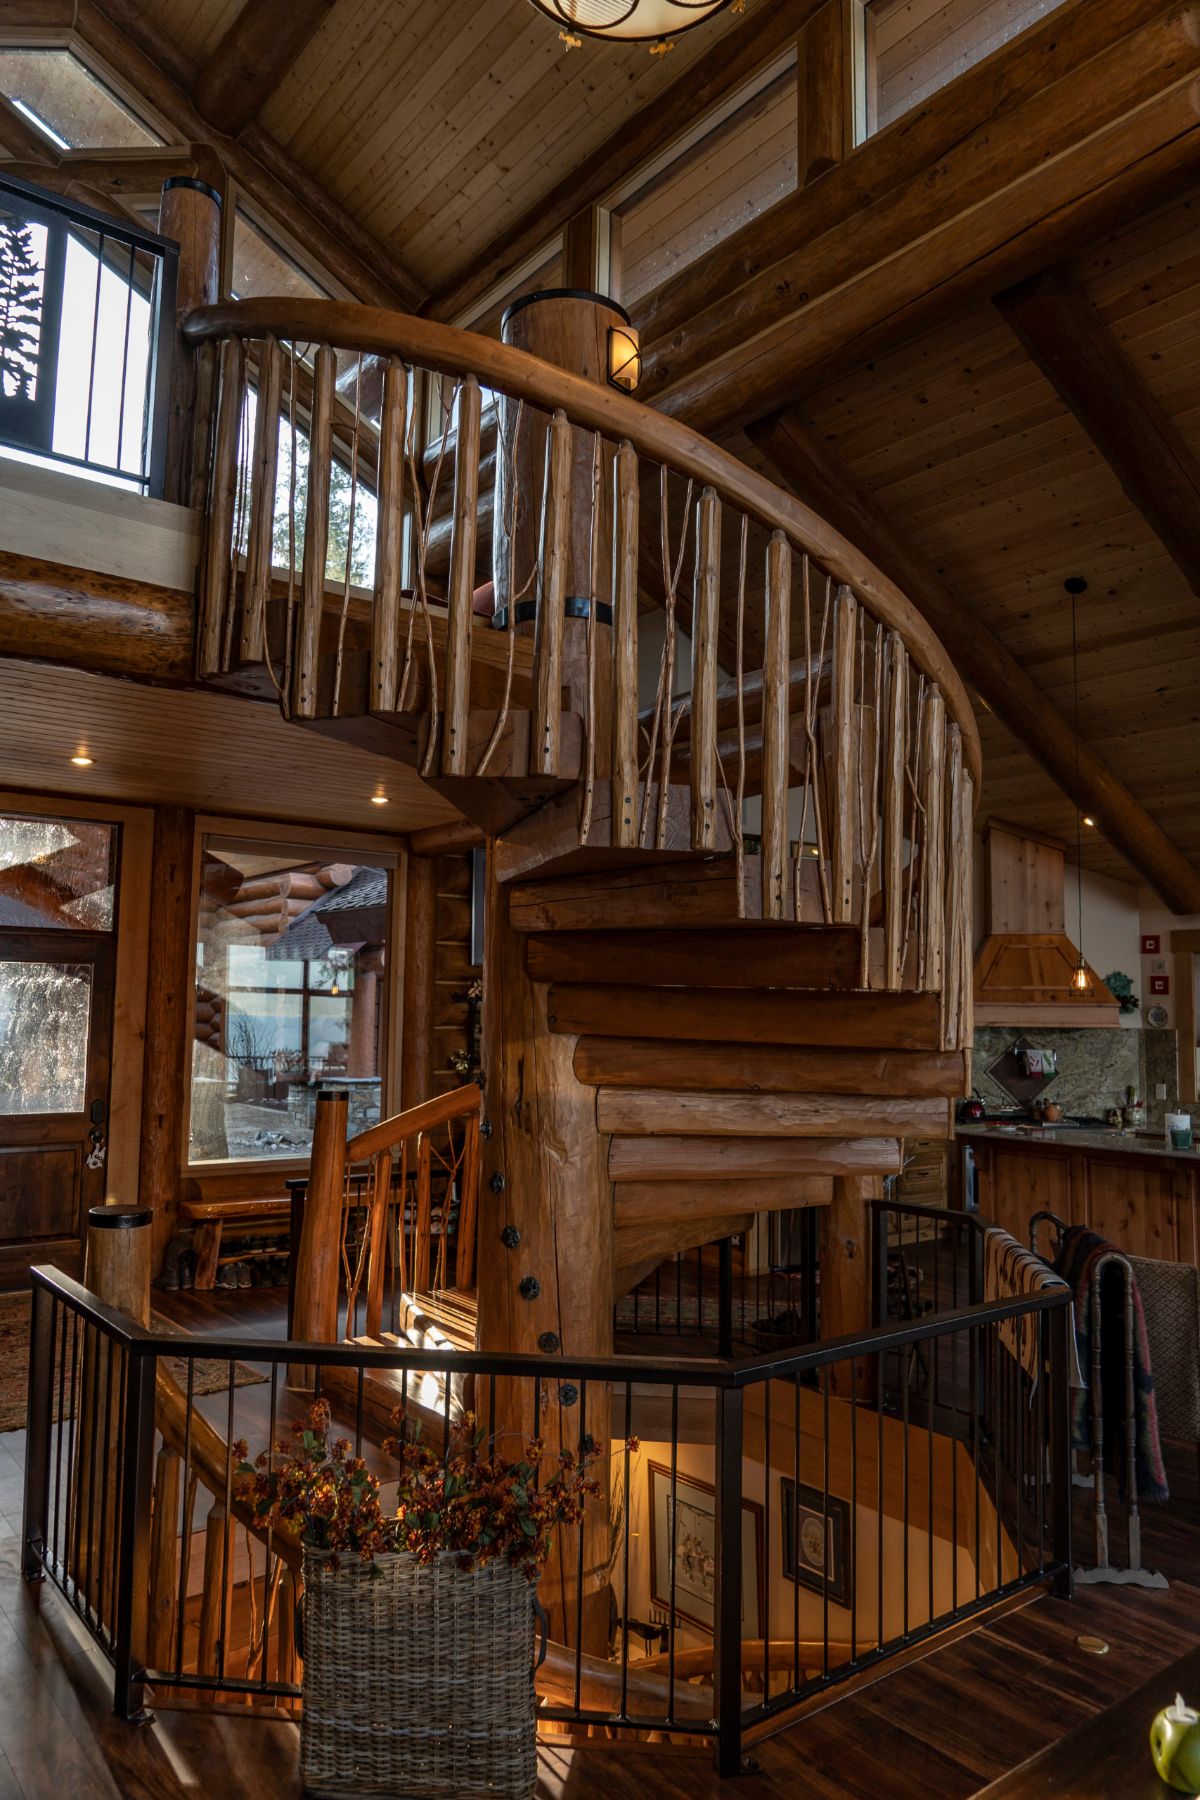 spiral staircase leading to second floor of log cabin